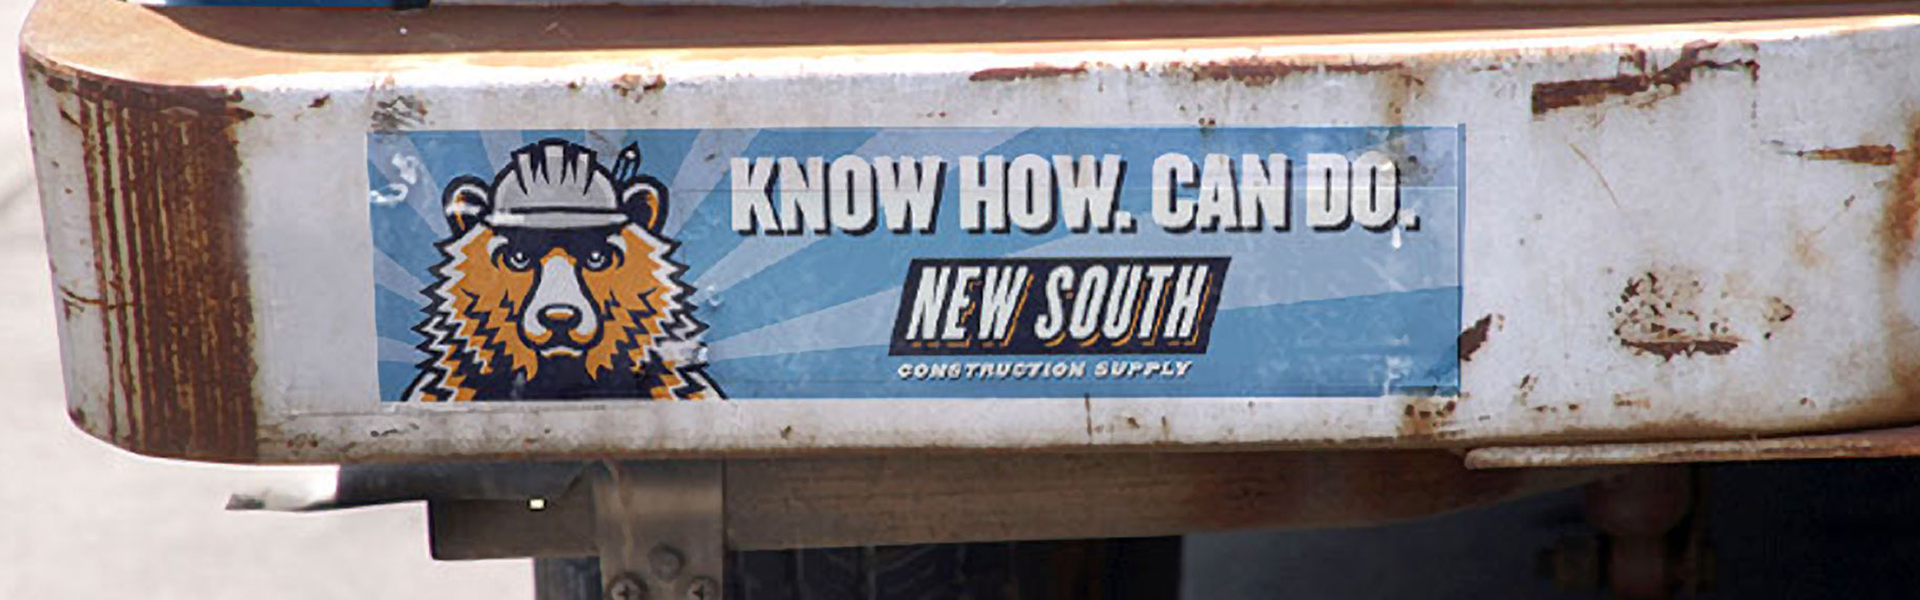 New South Construction Supply